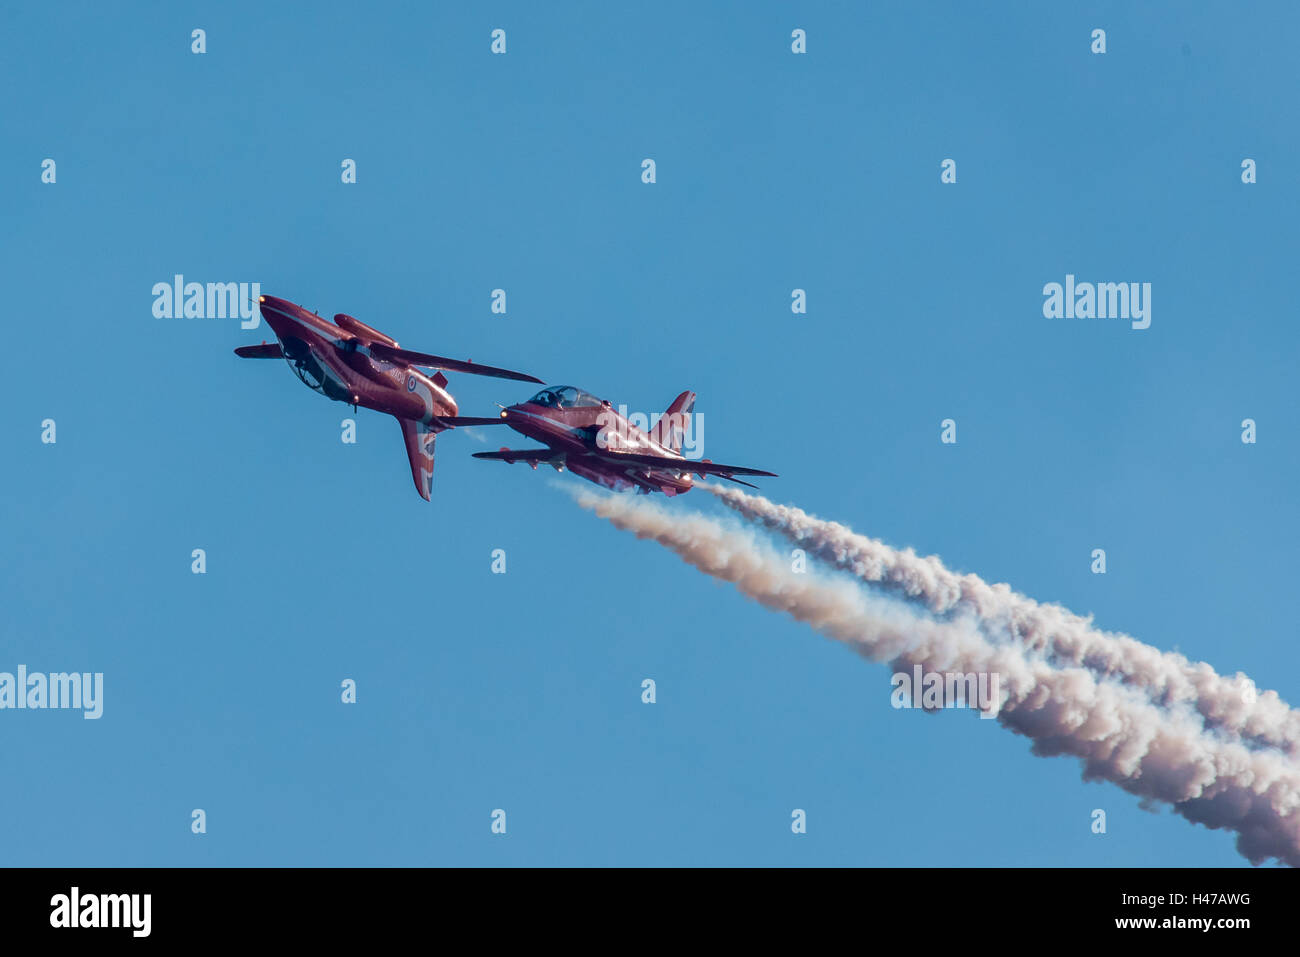 Two of the Red Arrows RAF display team in a low pass, one inverted. Stock Photo